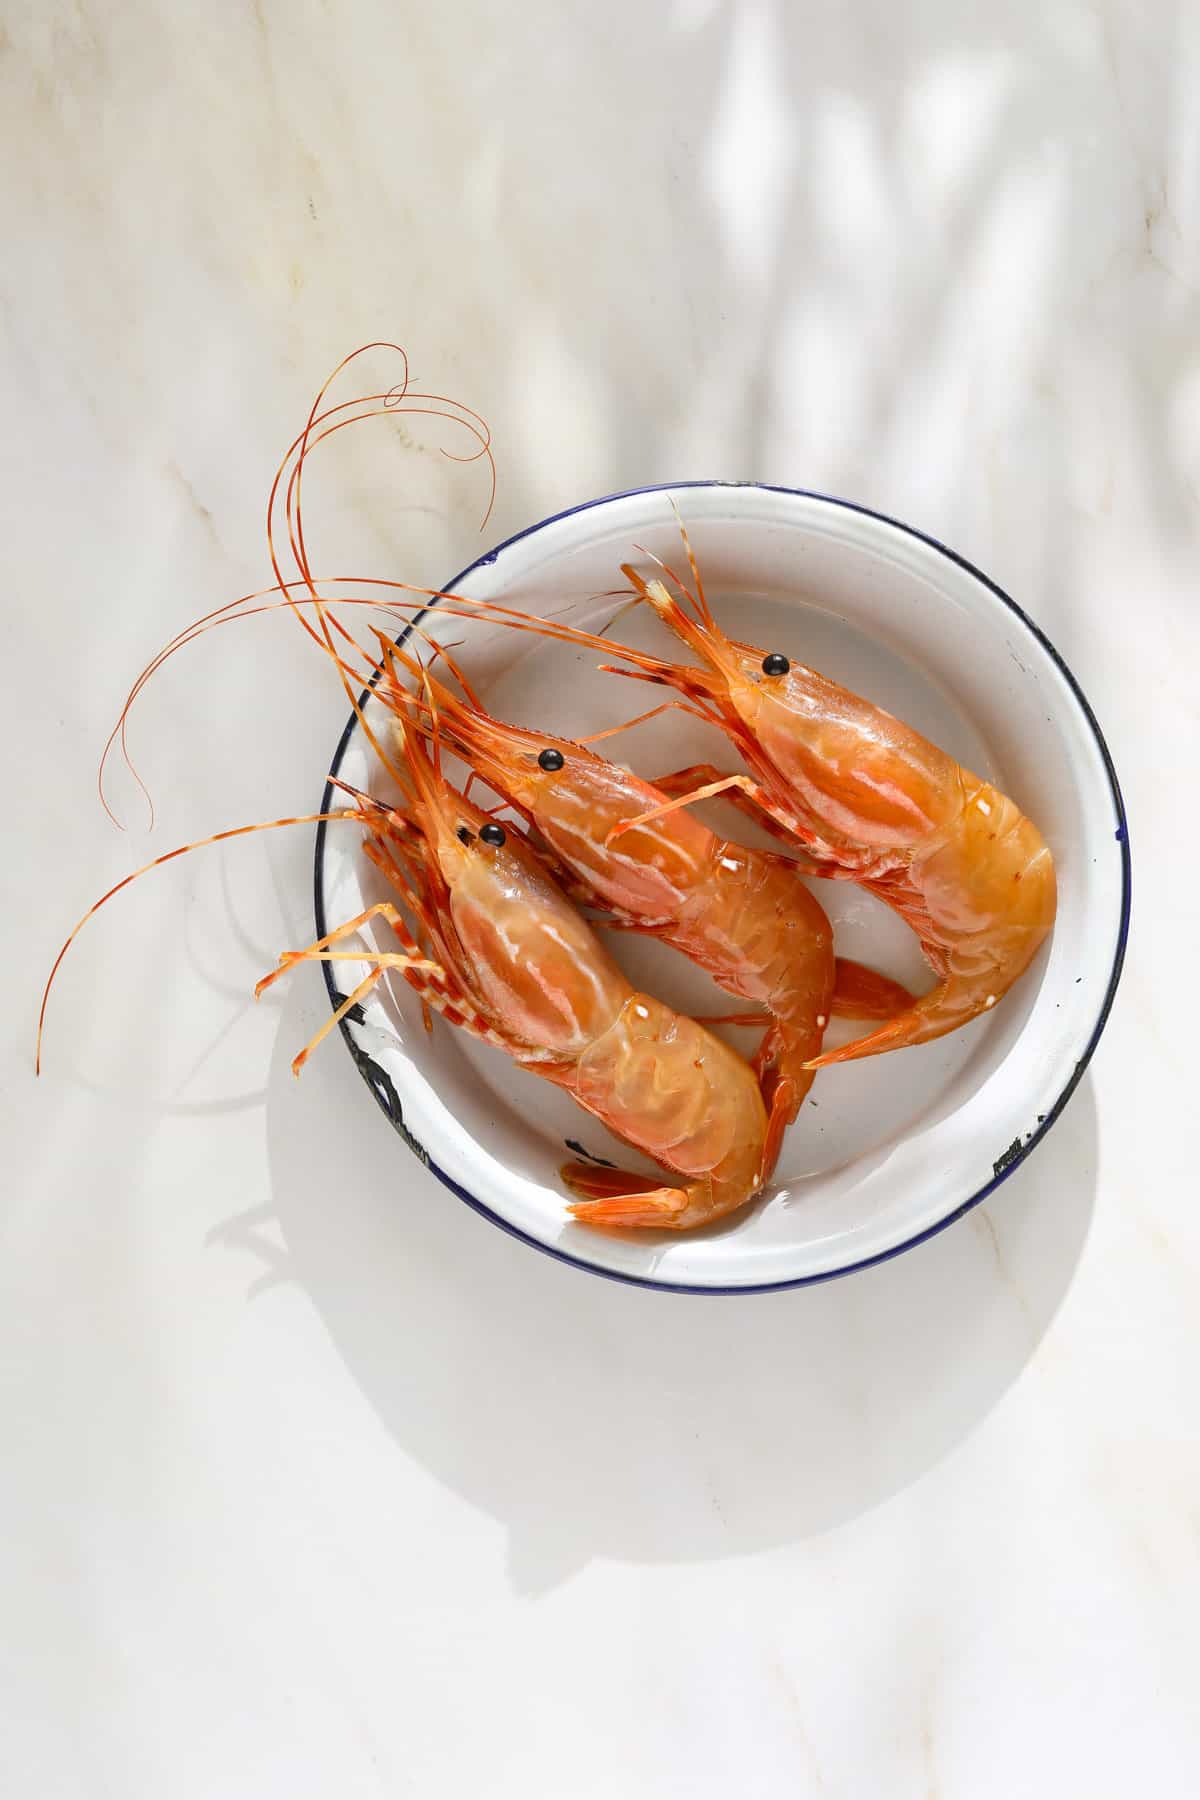 A white and blue enamel bowl with three live spot prawns.